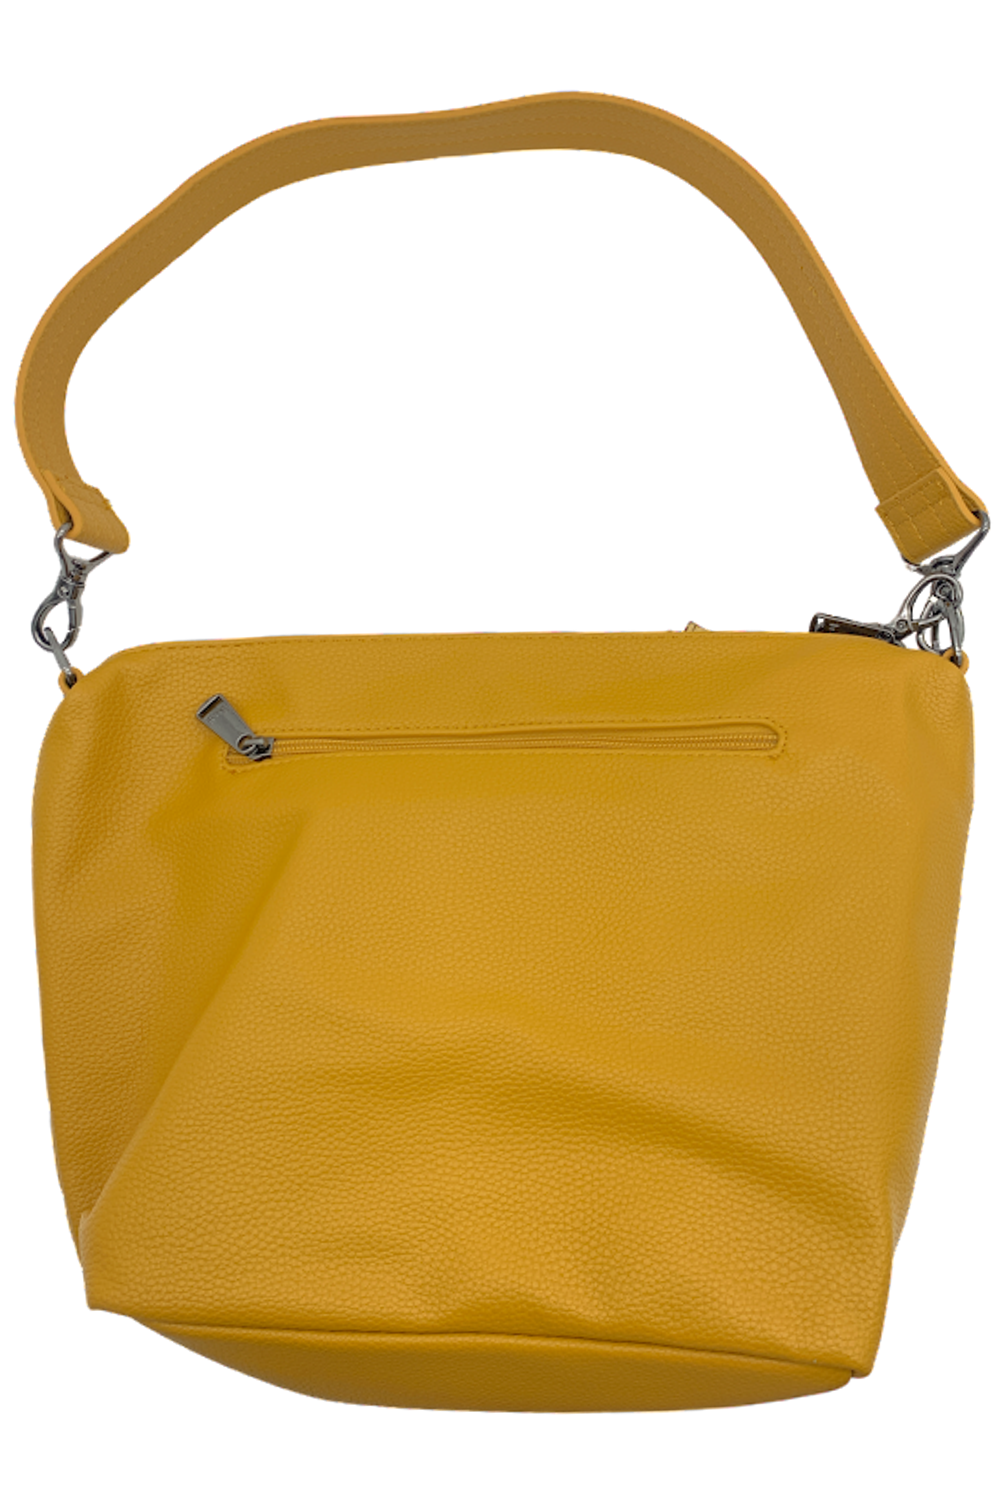 Lug Classic VL Quilted Crossbody Flare XL Amber Yellow/Leopard | Jender